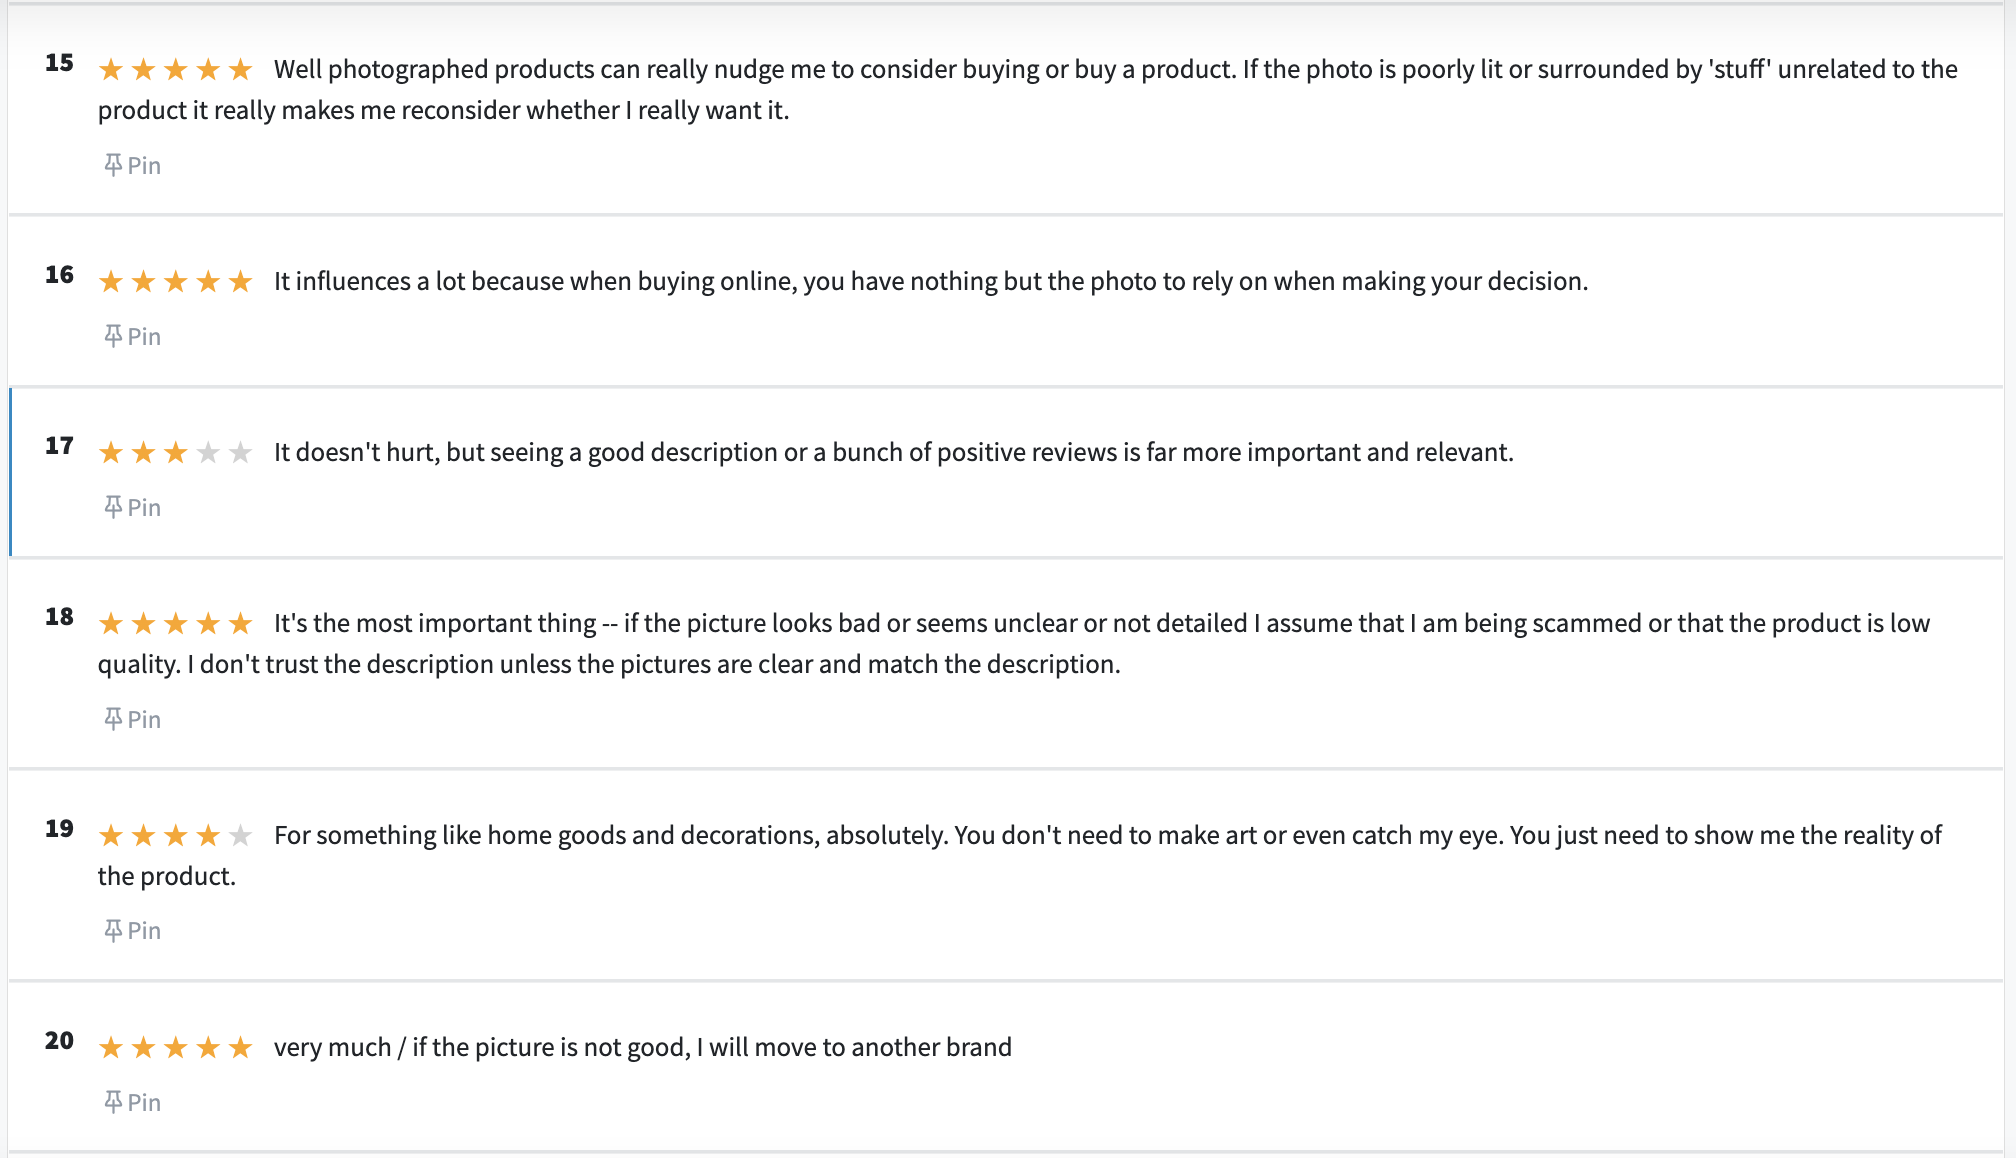 Screenshot of comments from a PickFu poll about product photos